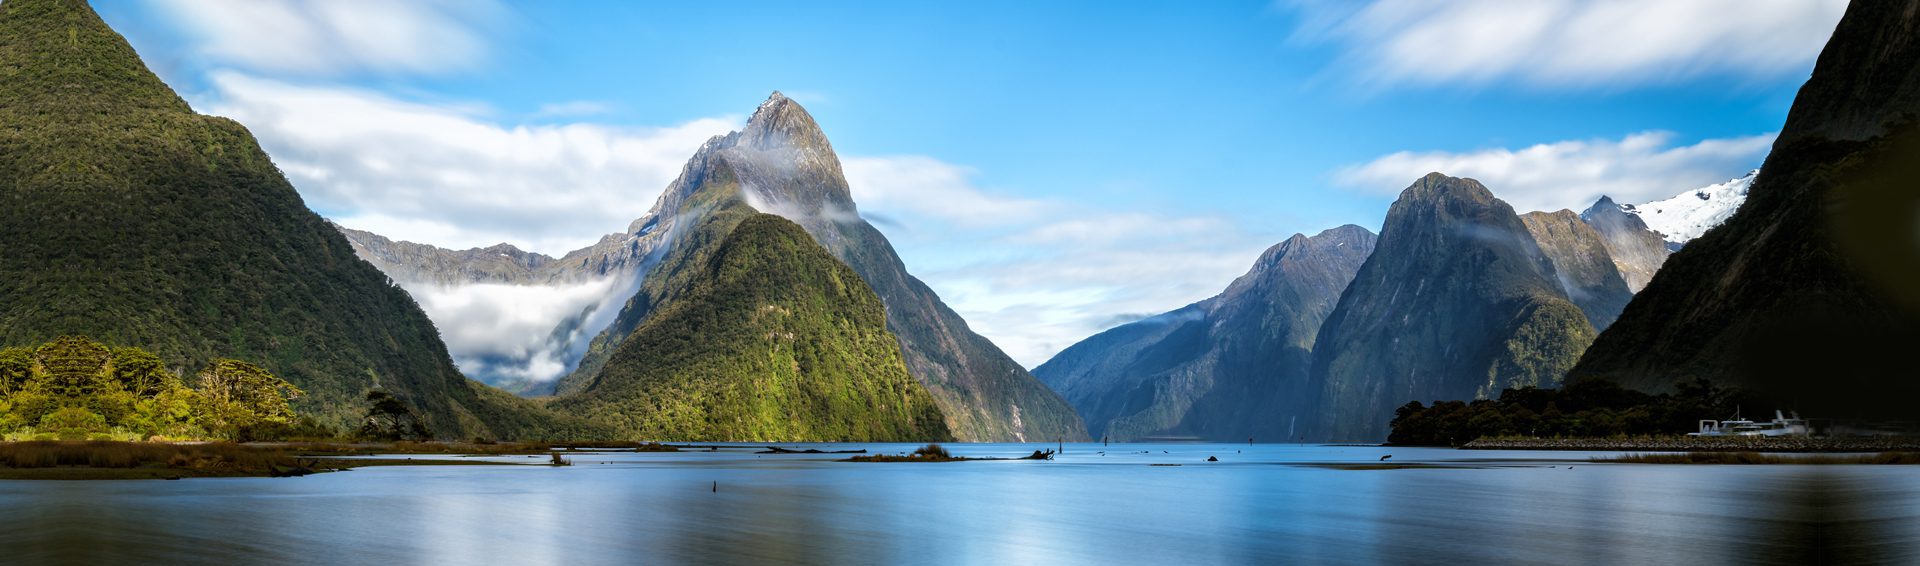 60% Off New Zealand Tours